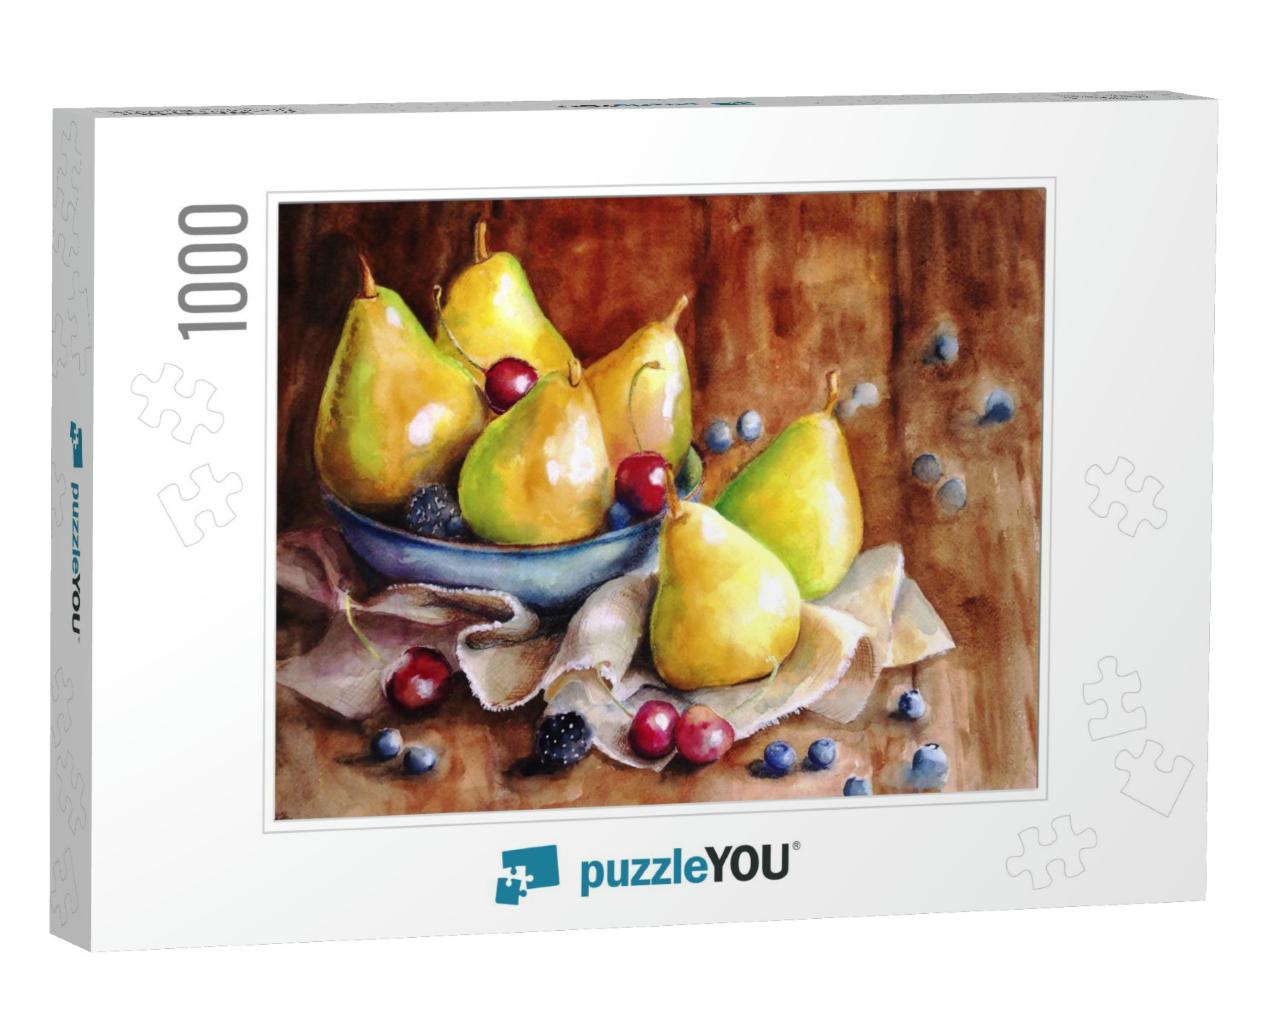 Still Life of Ripe Yellow Juicy Pears, Blackberries, Blue... Jigsaw Puzzle with 1000 pieces